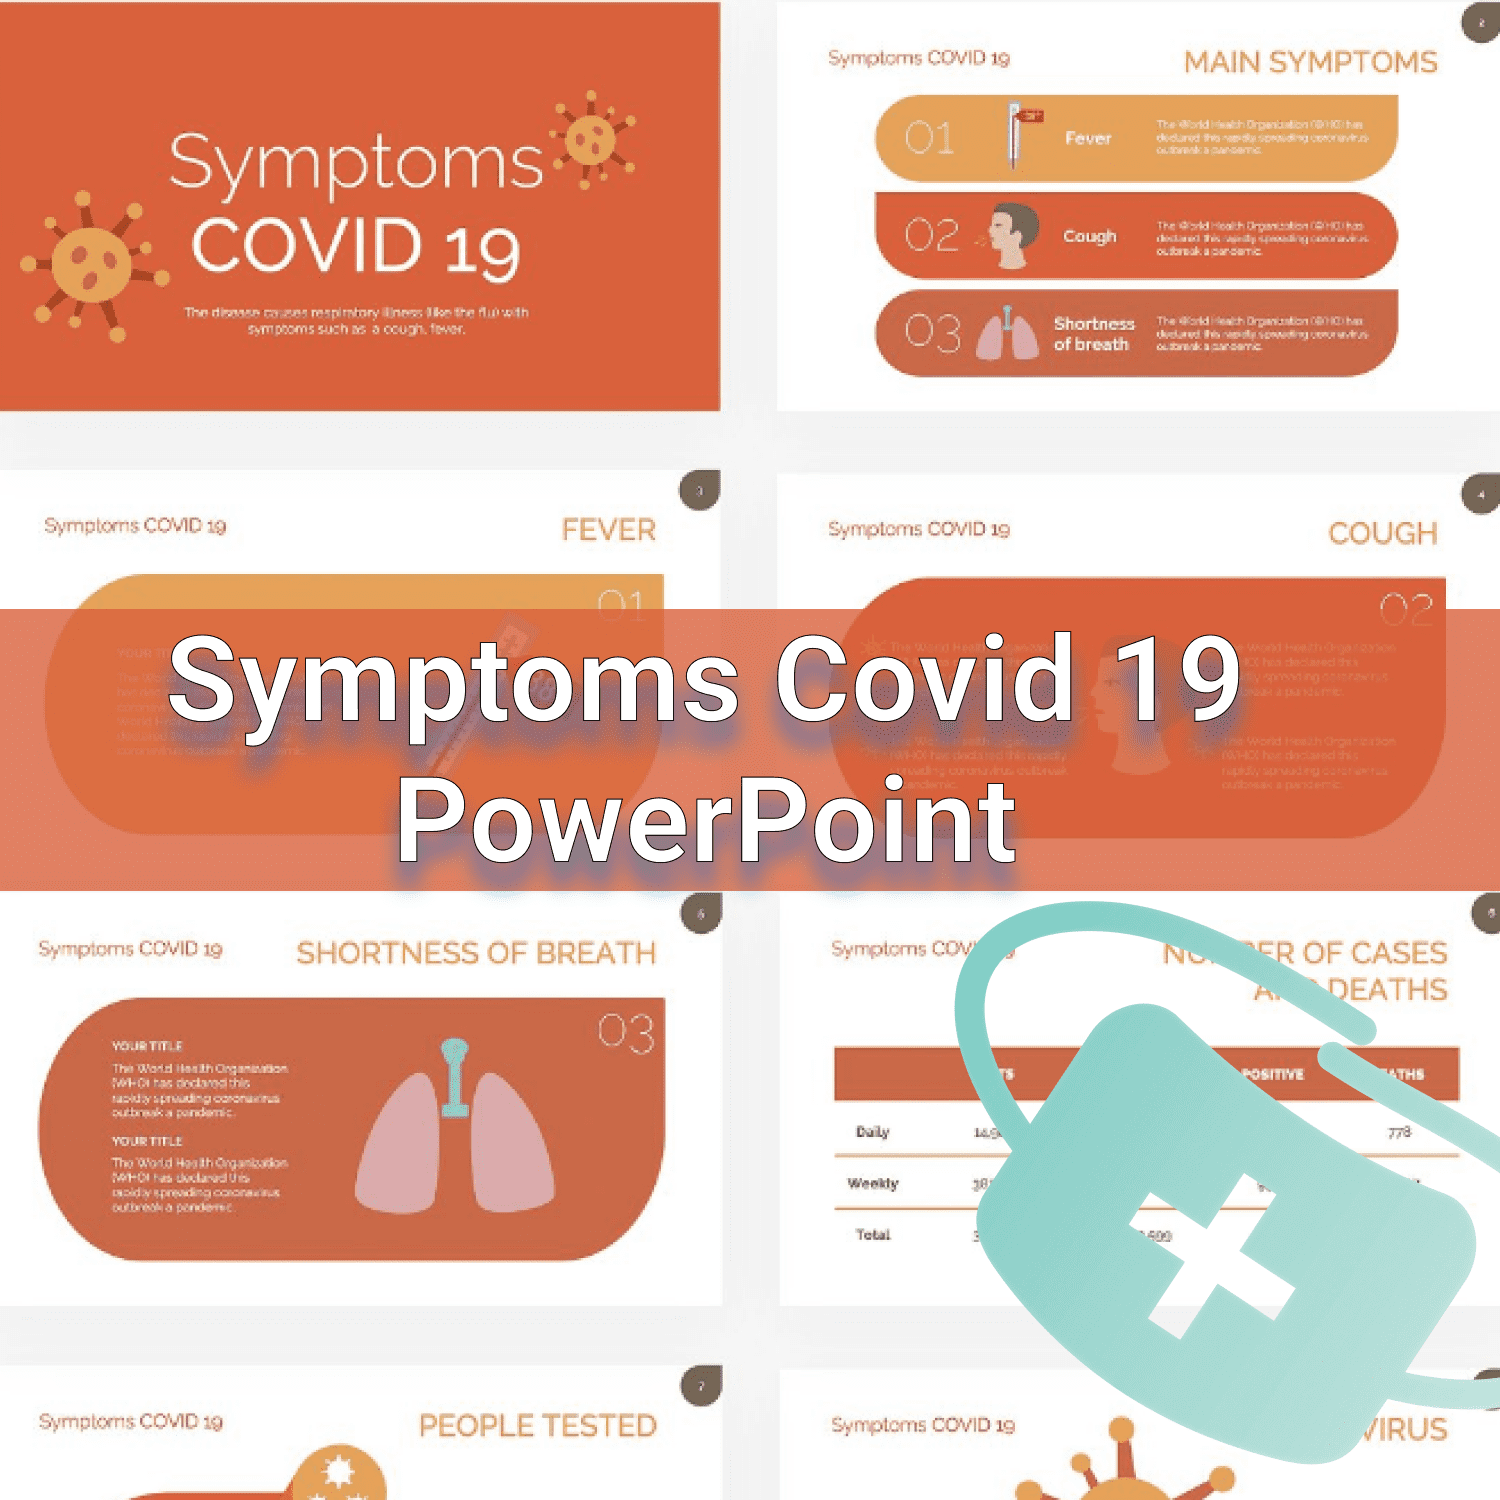 Symptoms Covid 19 PowerPoint cover image.